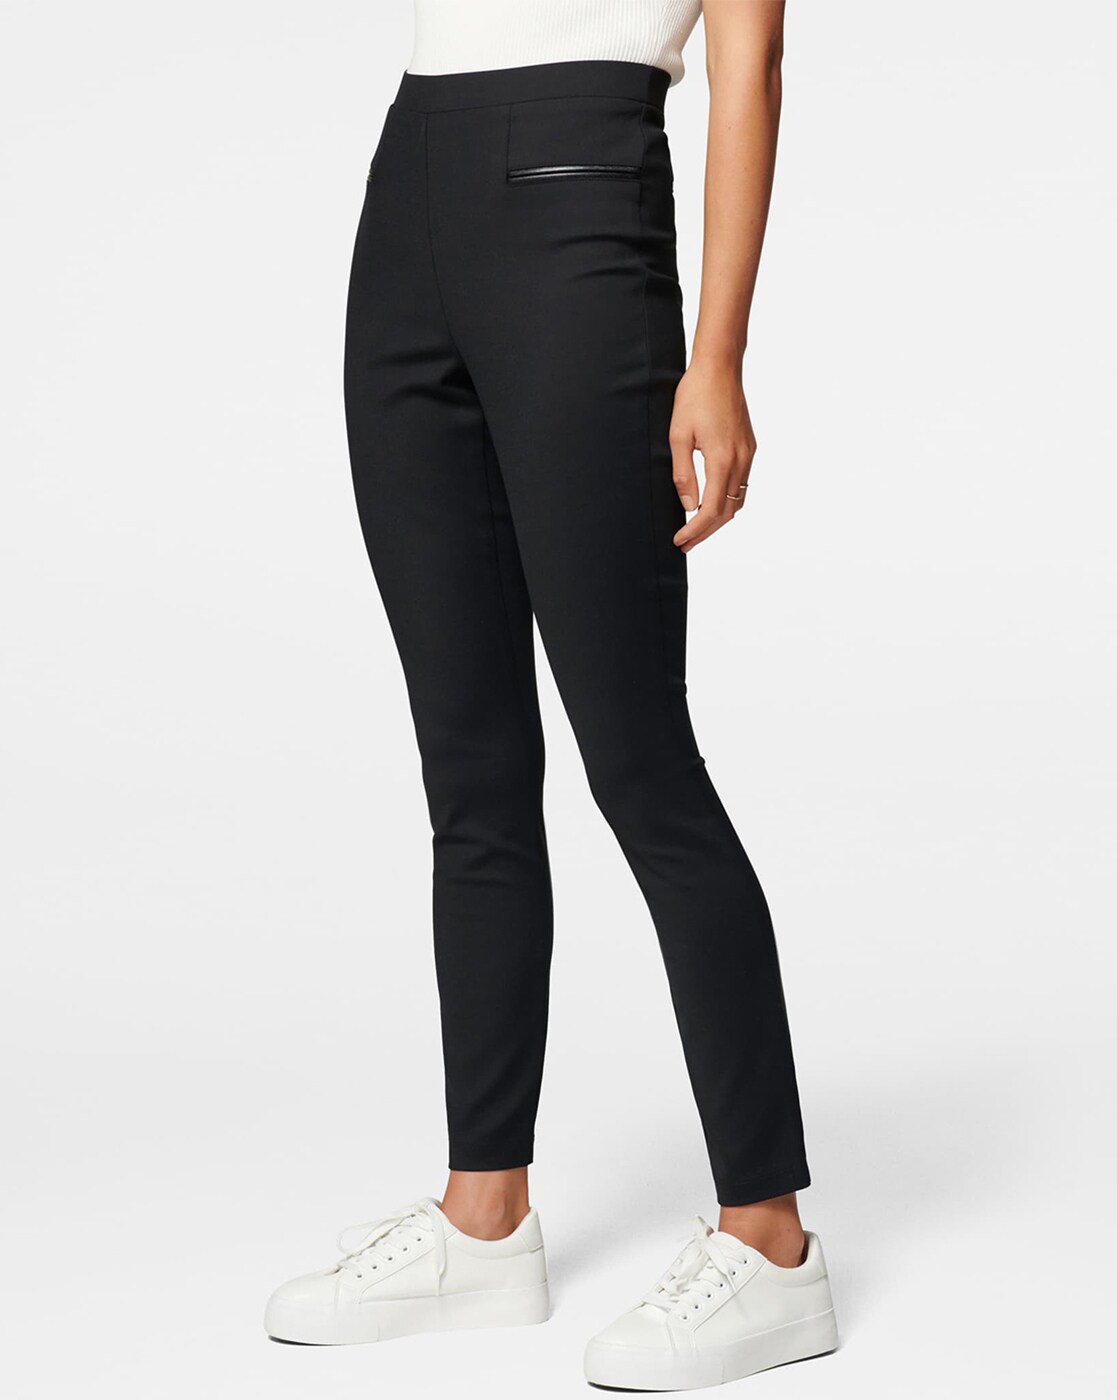 Buy Black Trousers & Pants for Women by Forever New Online